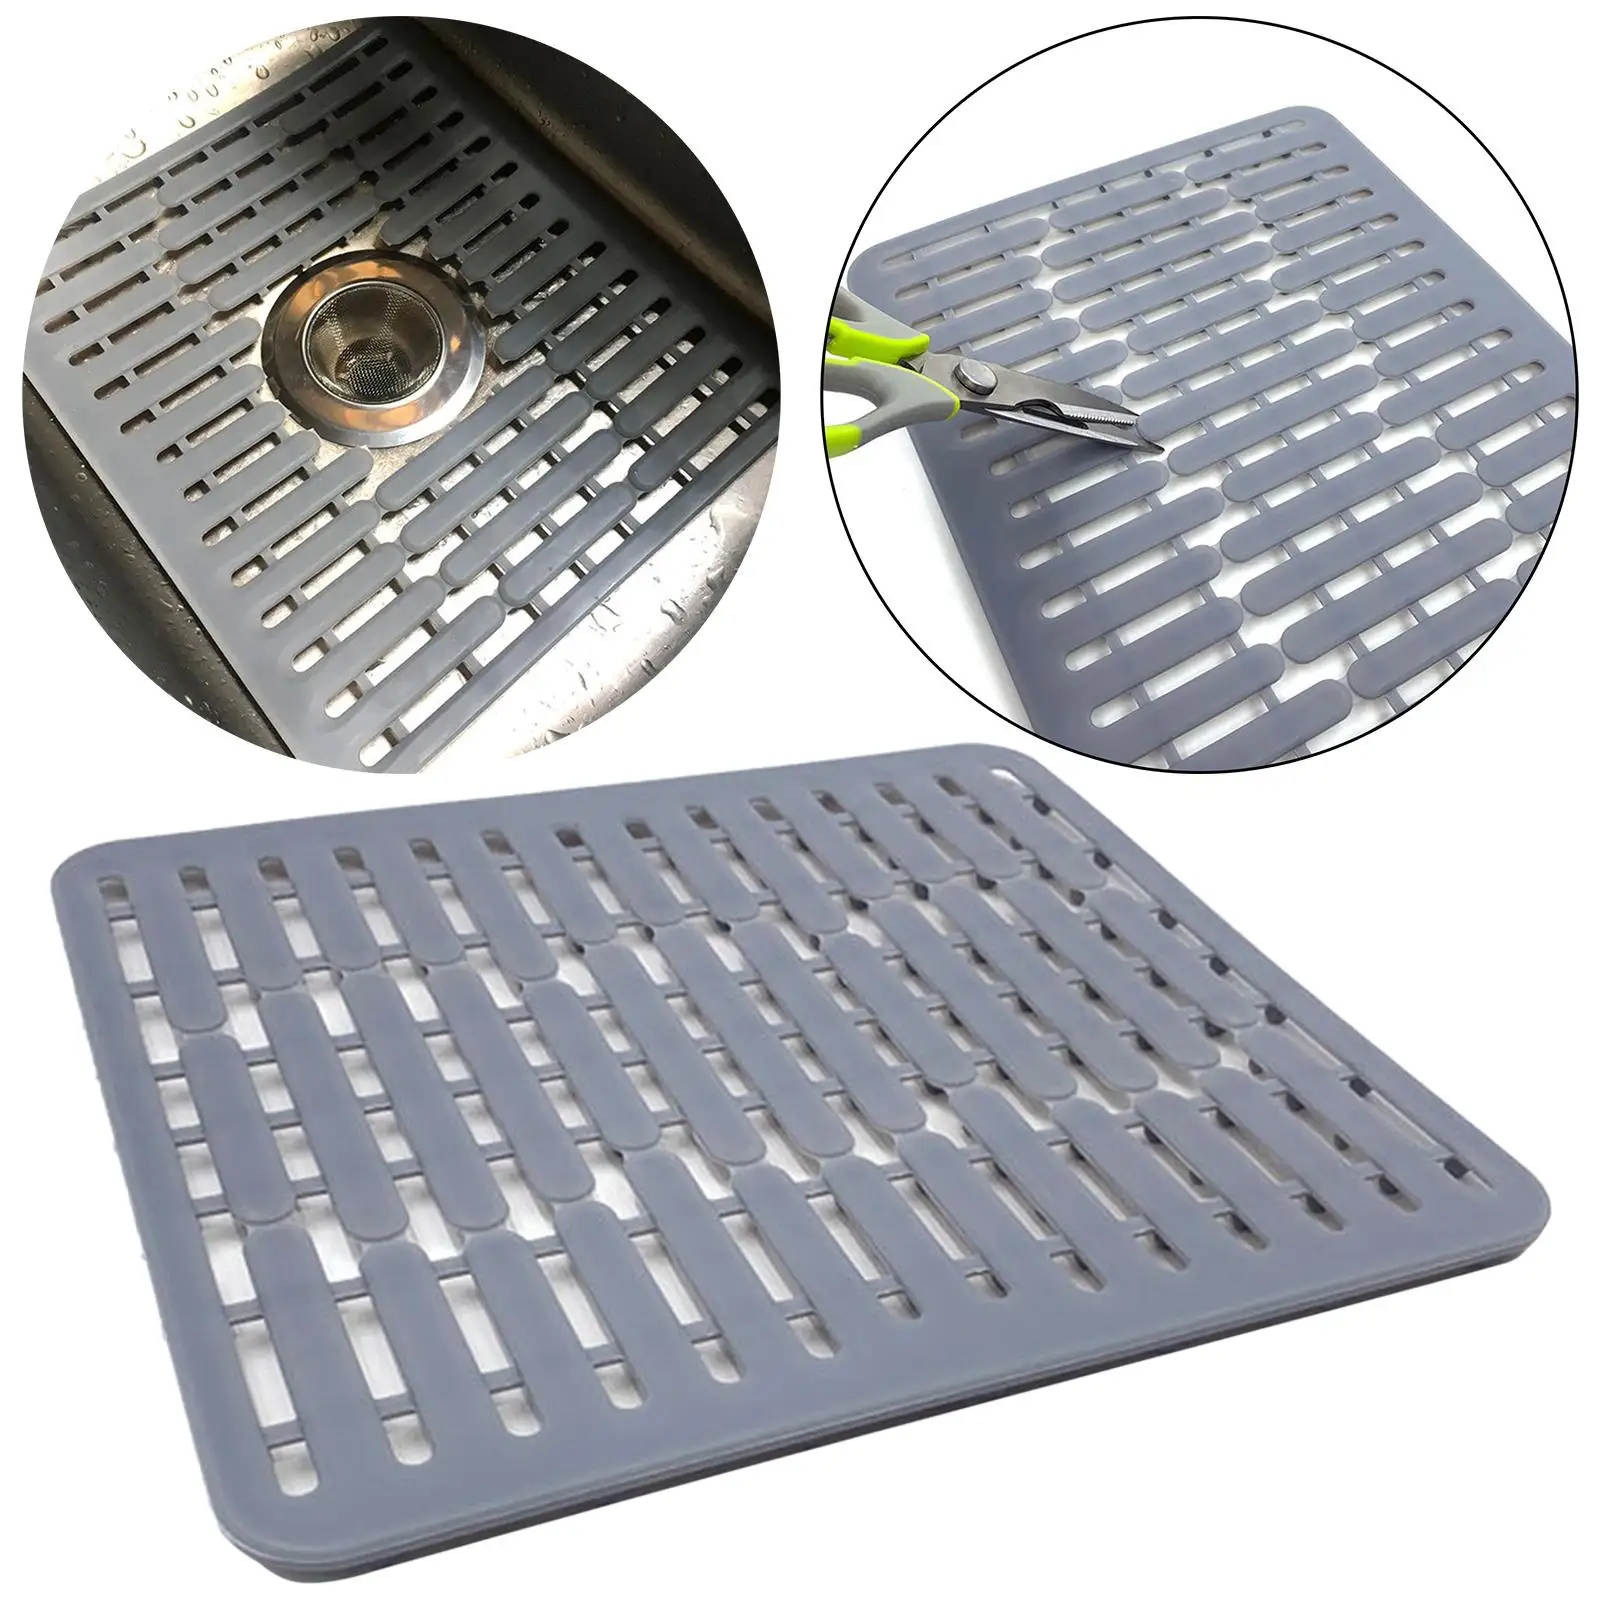 https://ae01.alicdn.com/kf/Sb3082d1b4ea744758c88e301577ba1f3M/Household-Silicone-Sink-Mat-Non-Slip-Dish-Protector-Heat-Resistant-Placemat-Sink-Grid-Sink-Protector-for.jpg